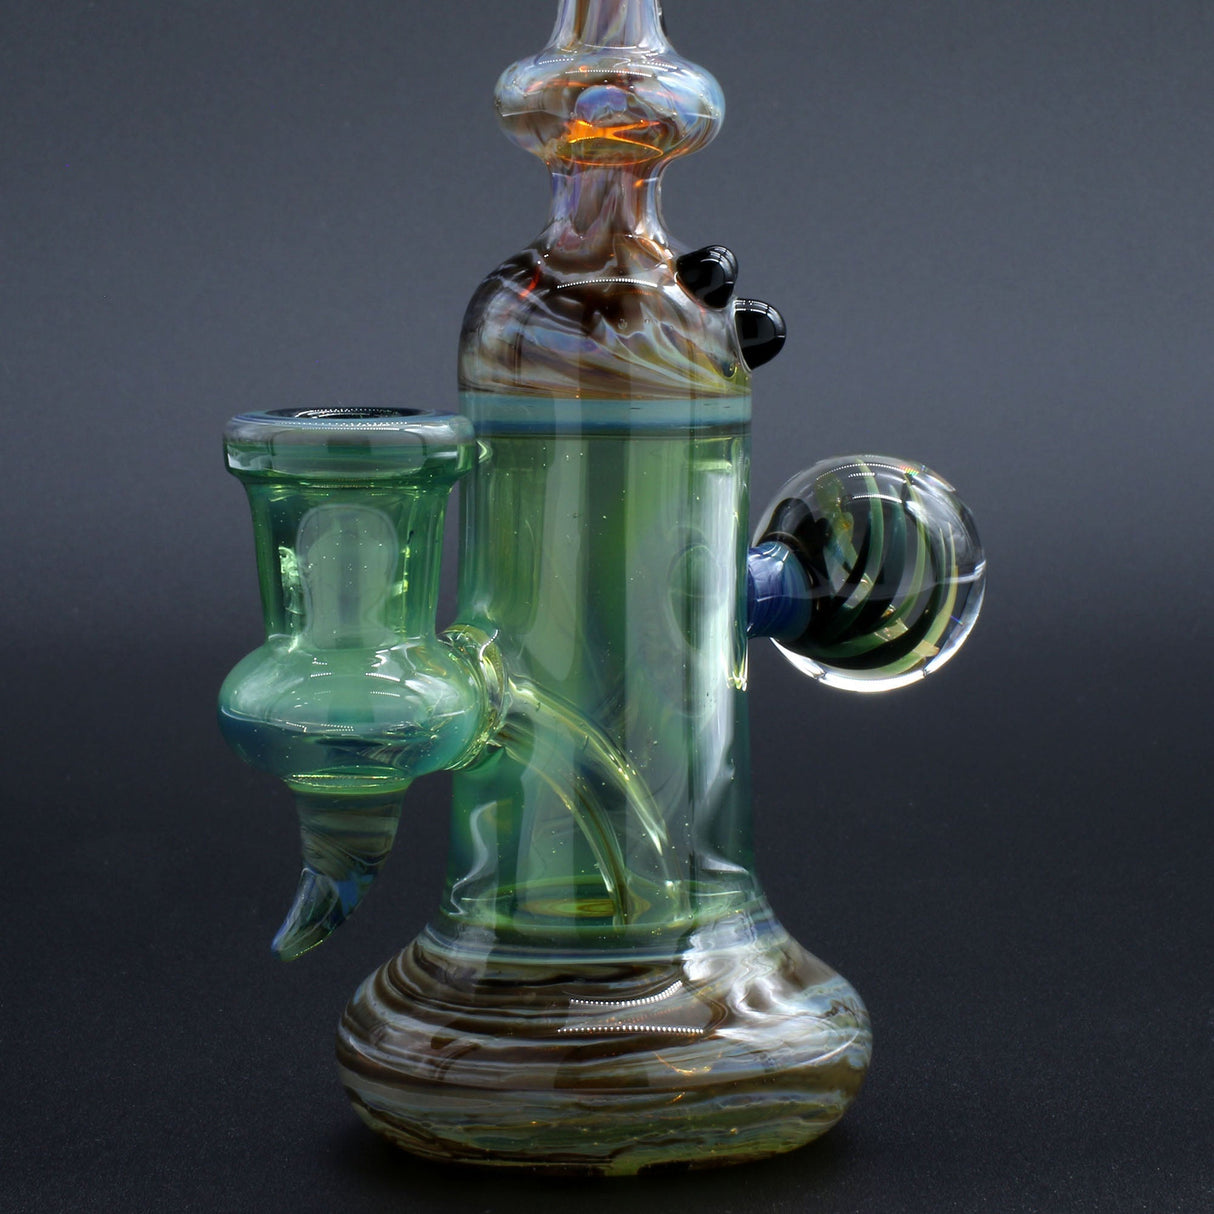 Clayball Glass "Enclave Nebula" Heady Sherlock Dab-Rig with intricate design, front view on dark background